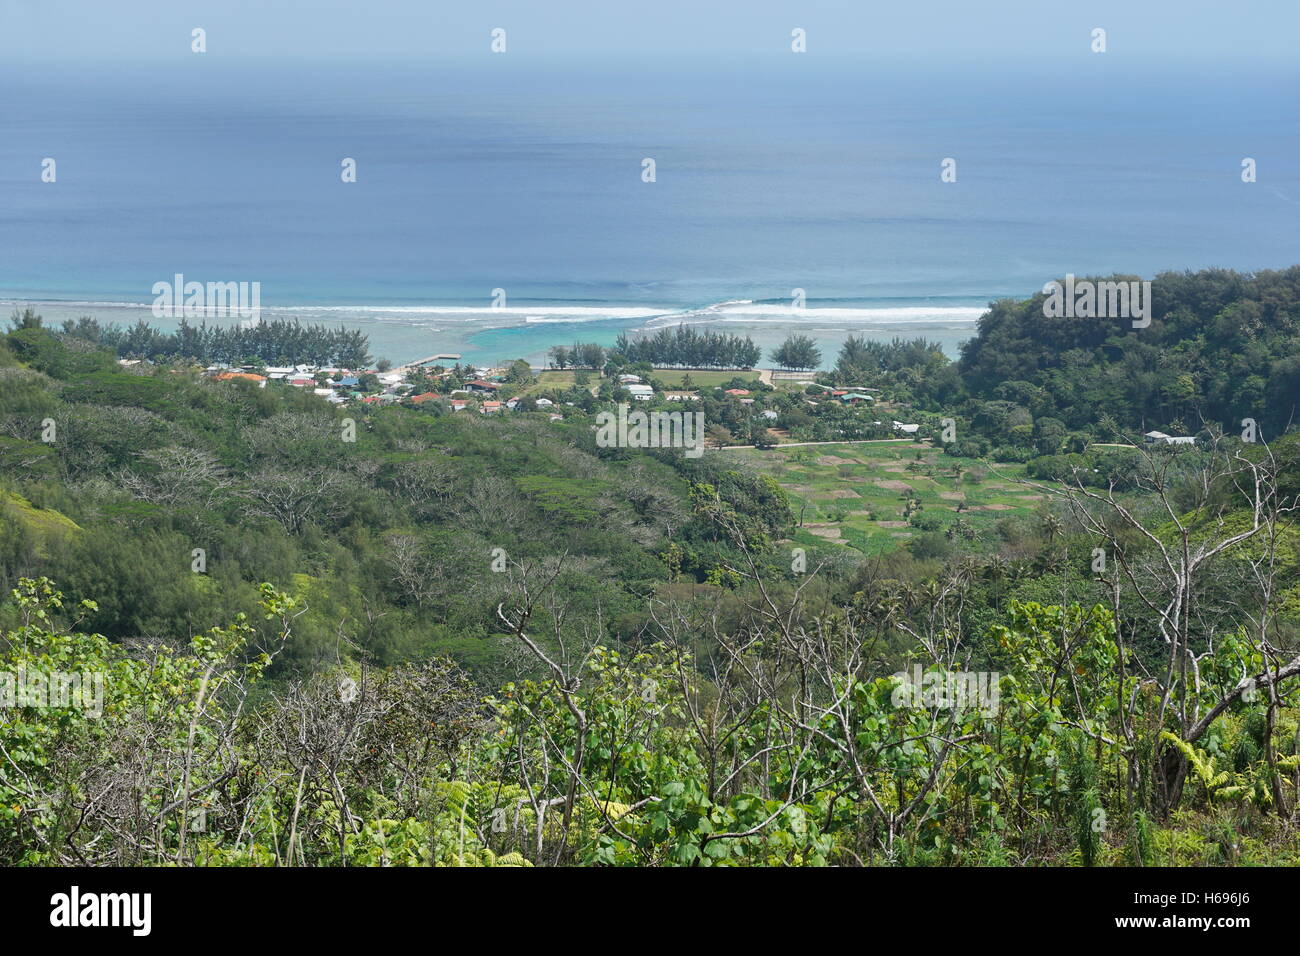 Viewpoint over the coastal village of Avera from the heights of the island of Rurutu, Pacific ocean, Austral, French Polynesia Stock Photo